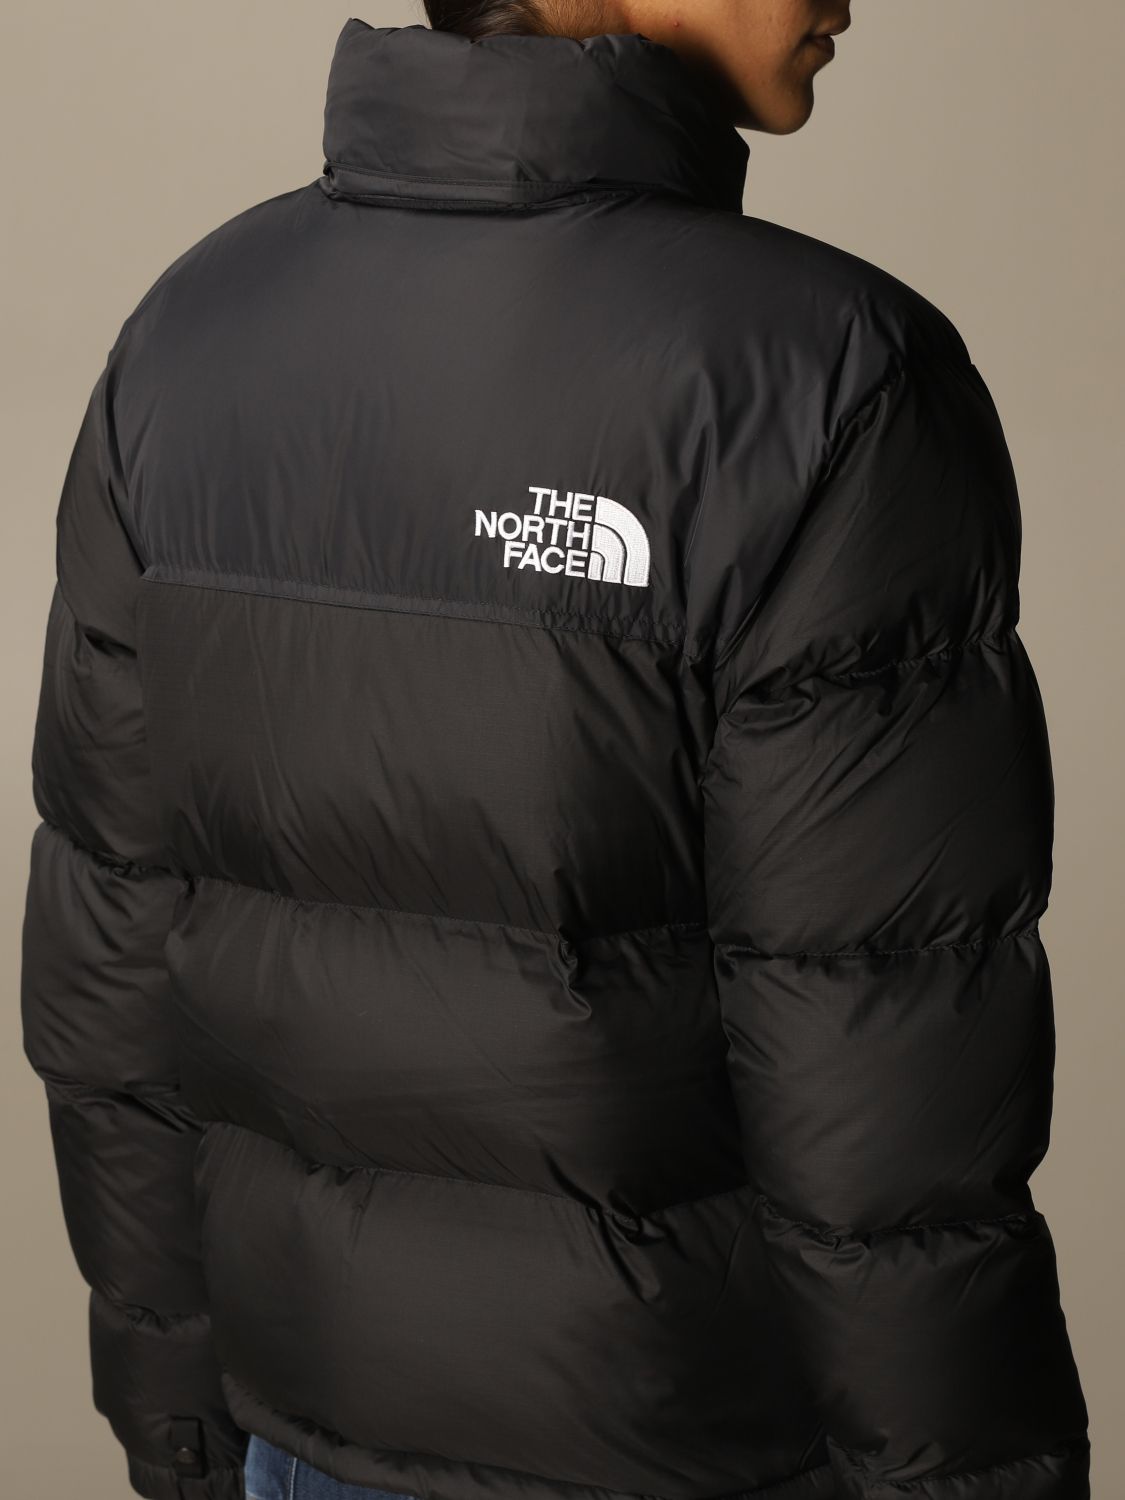 THE NORTH FACE: Jacket women | Jacket The North Face Women Black